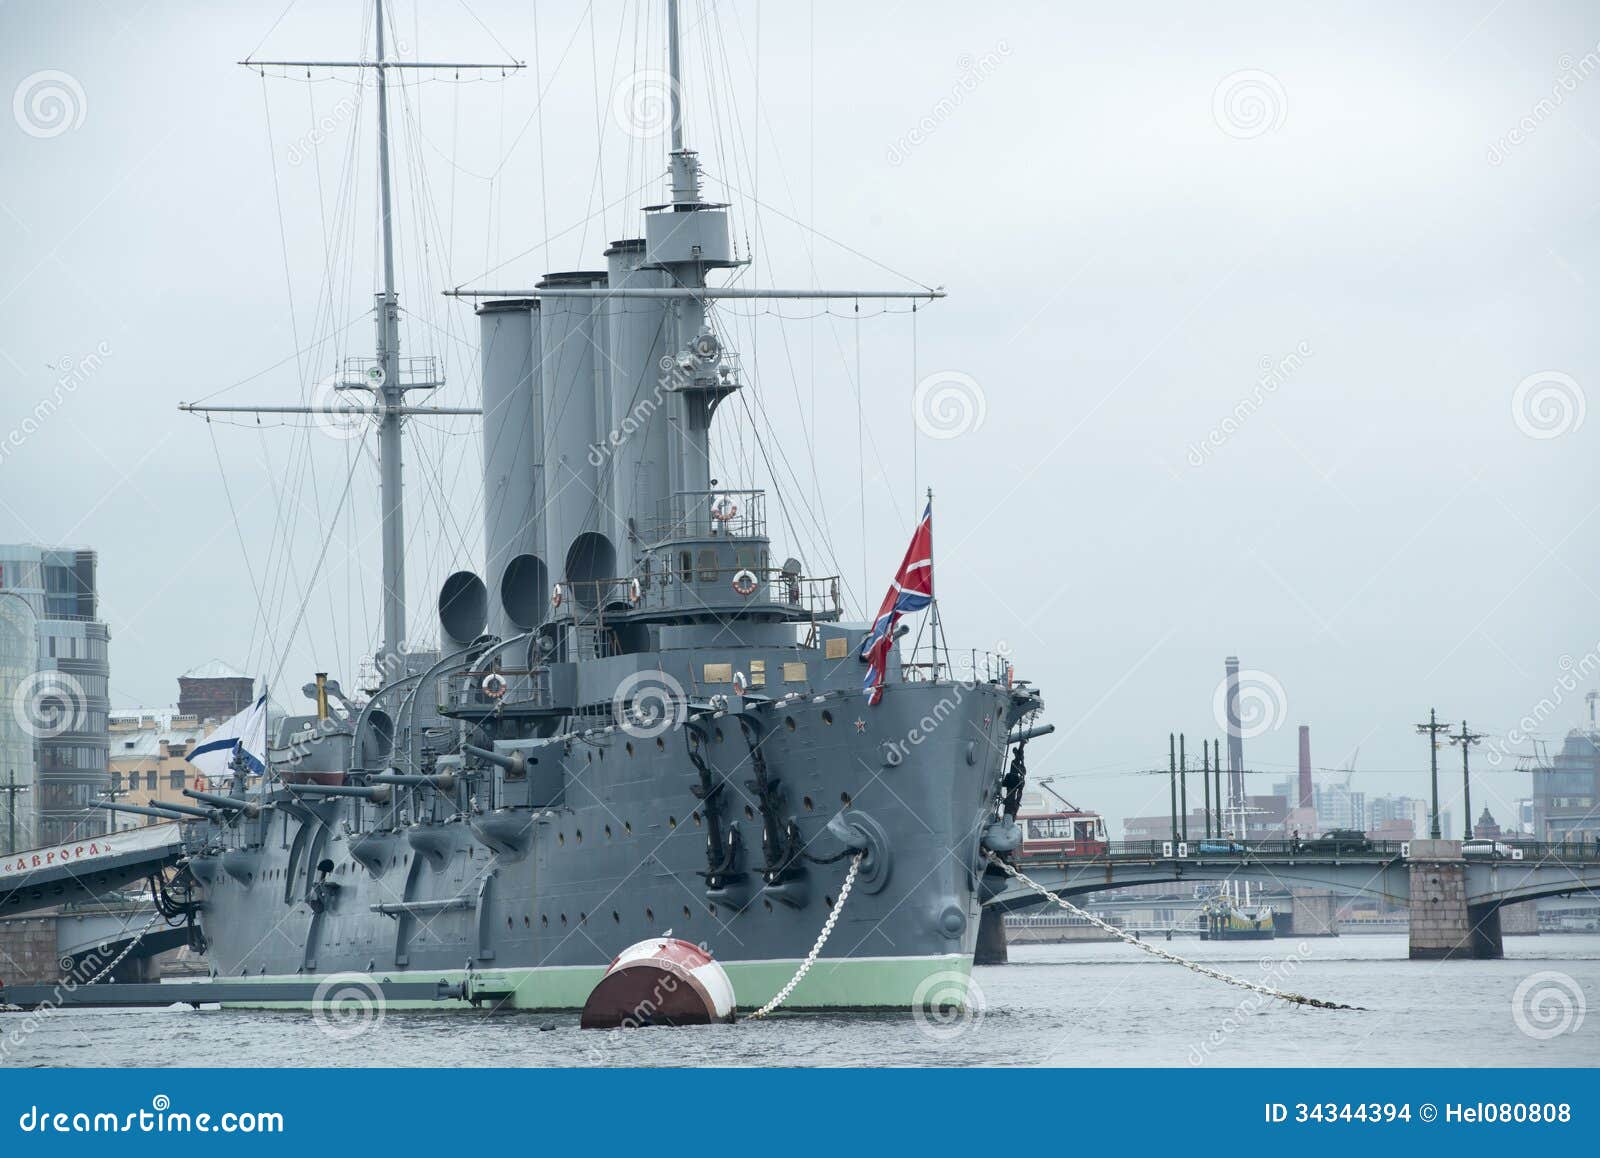 Aurora A Russian Museum Ship Editorial Stock Image - Image 